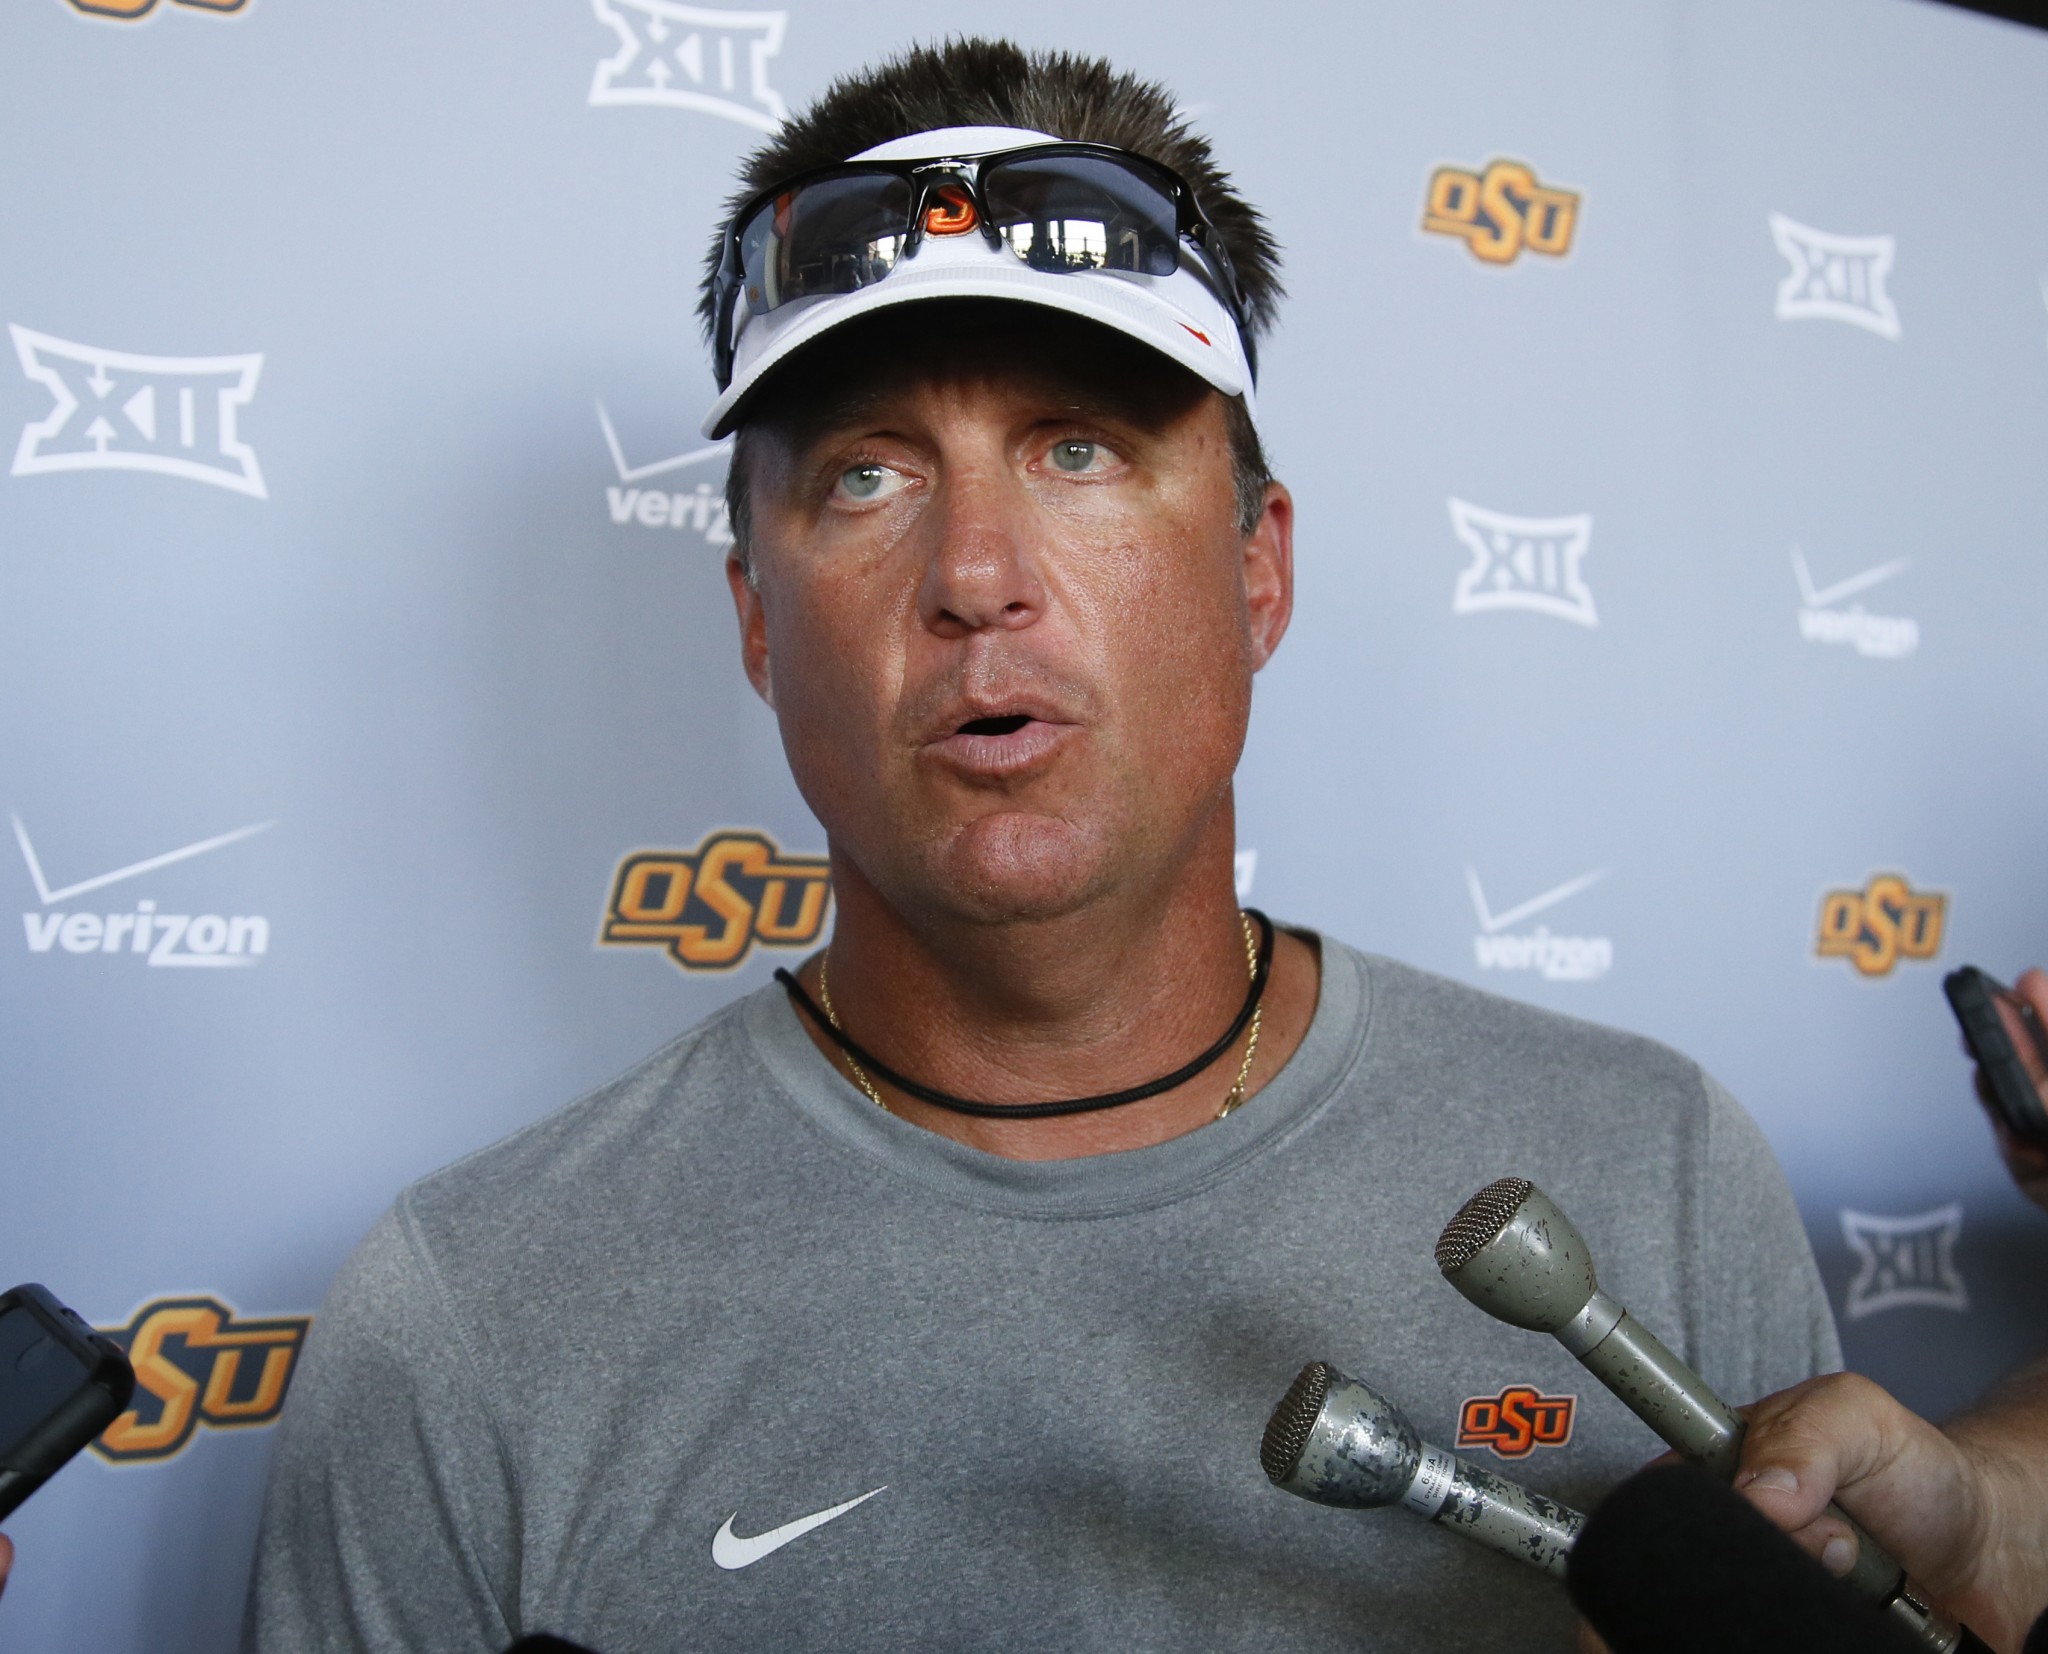 Oklahoma State head coach Mike Gundy talks with the media following an NCAA college football practice of the year in Stillwater, Okla., Tuesday, Aug. 2, 2016. (AP Photo/Sue Ogrocki)